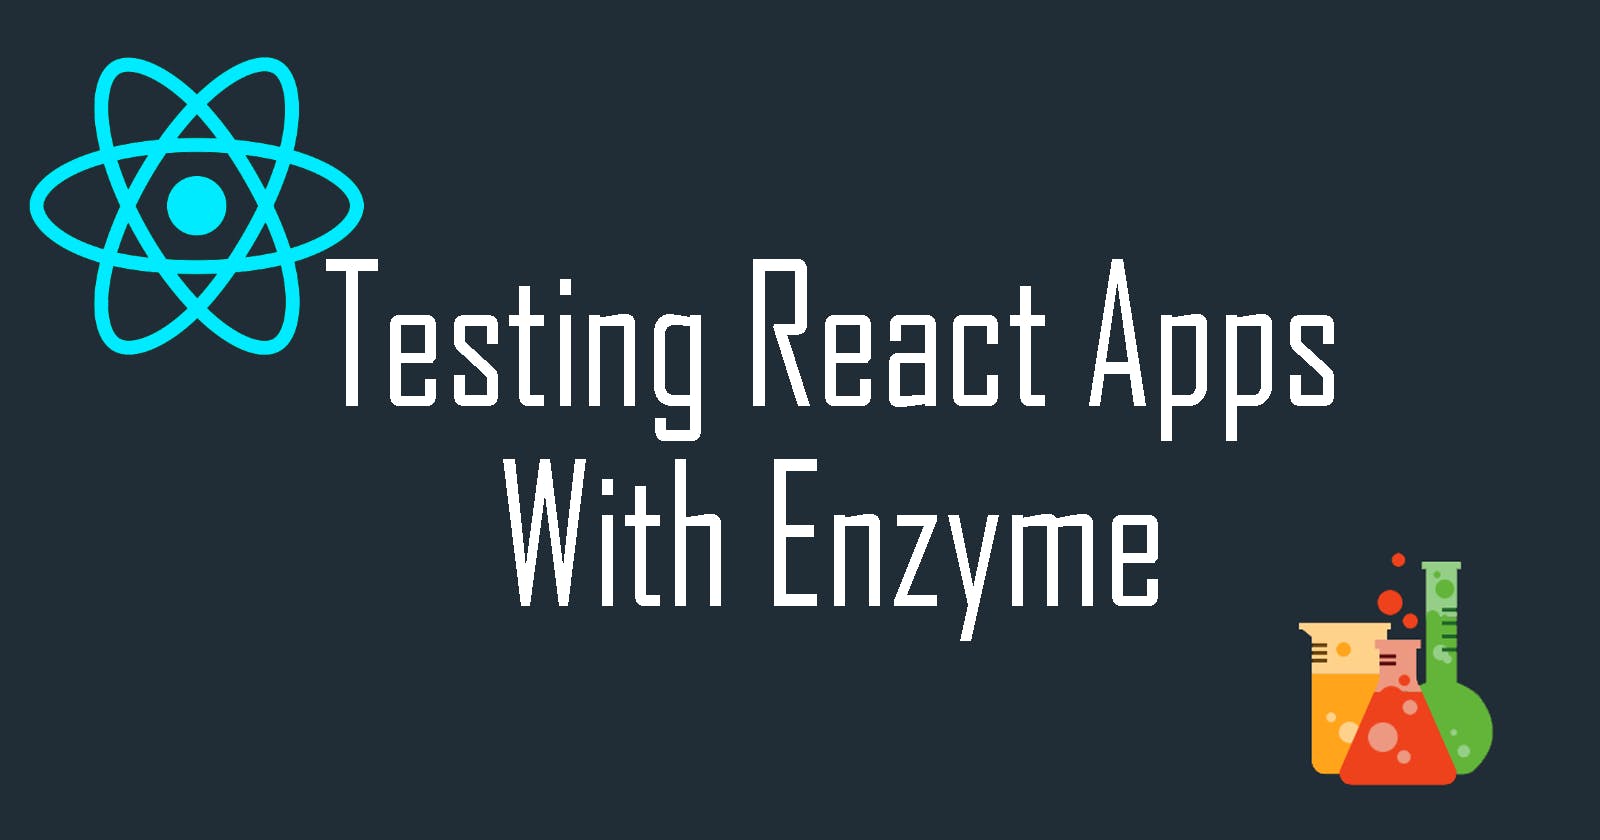 Test Redux Connect Components with Enzyme